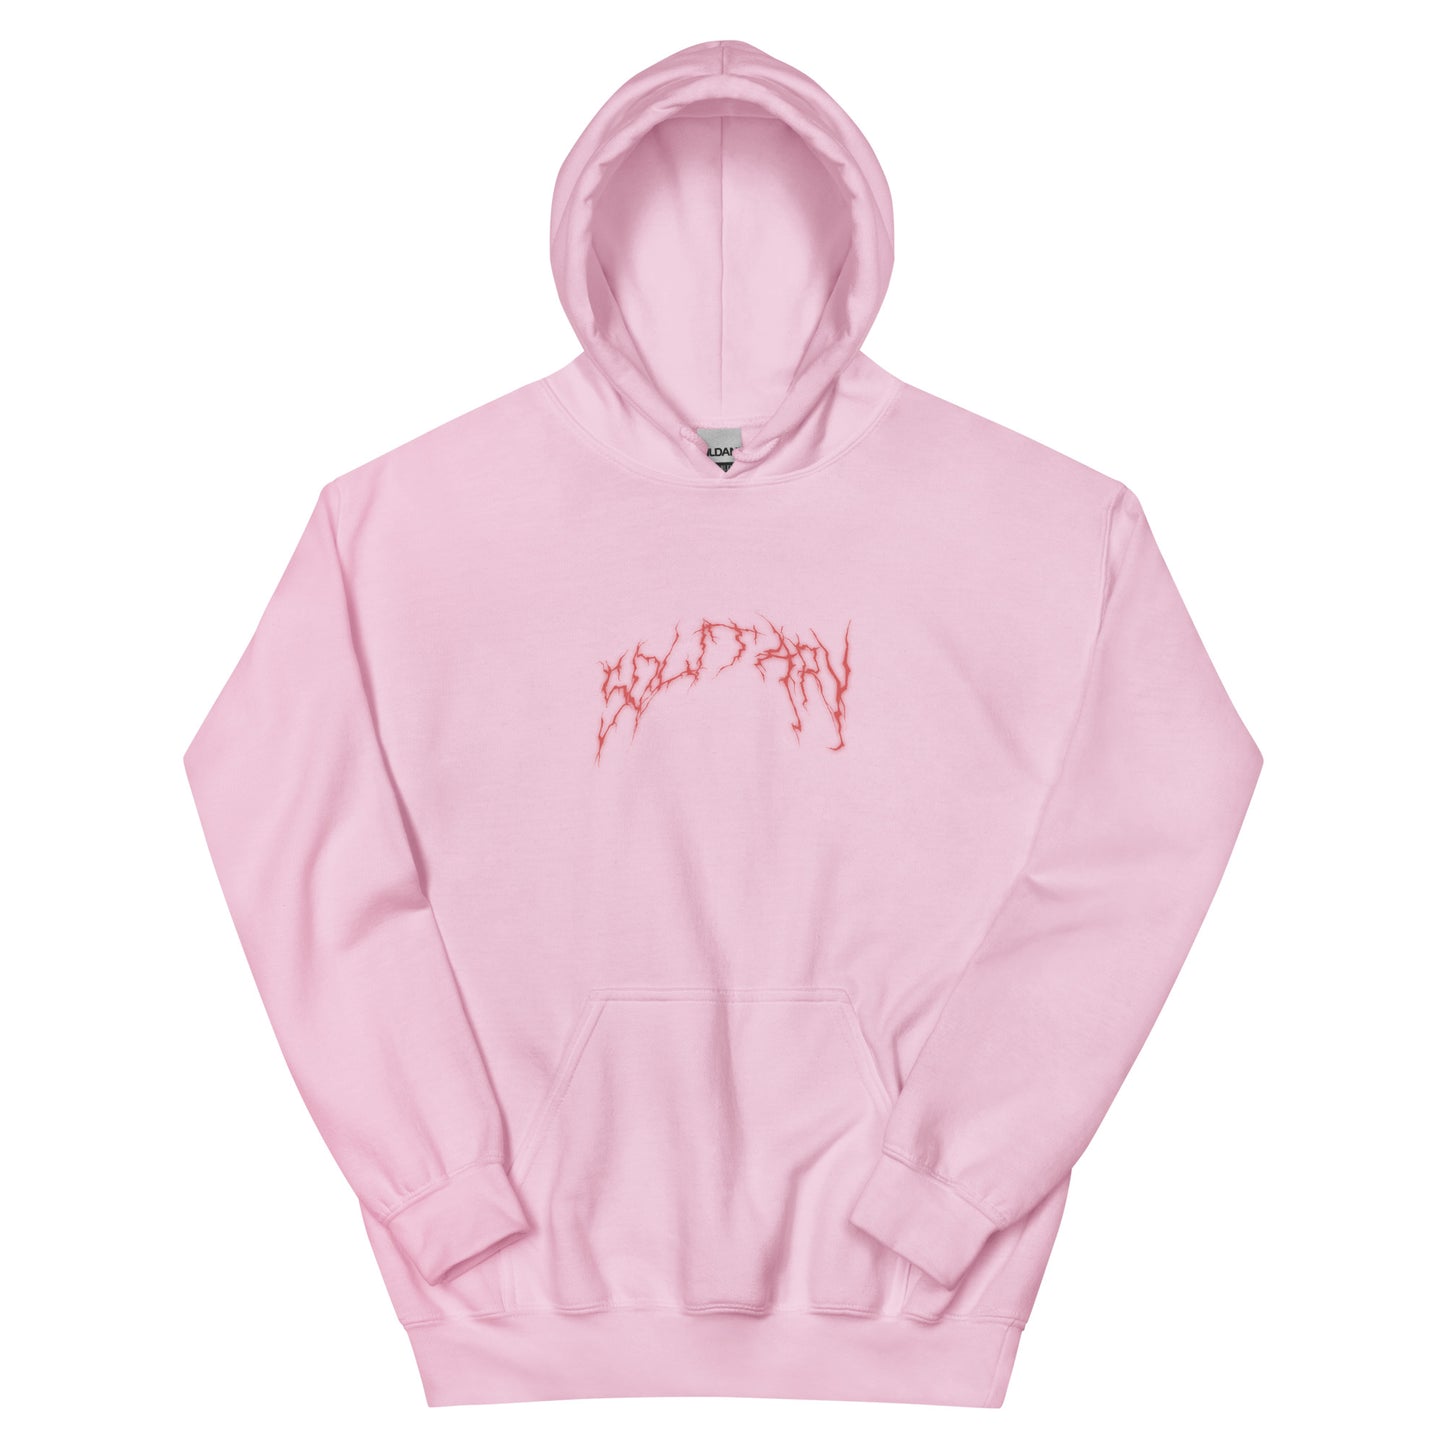 Butterfly Solitary Hoodie